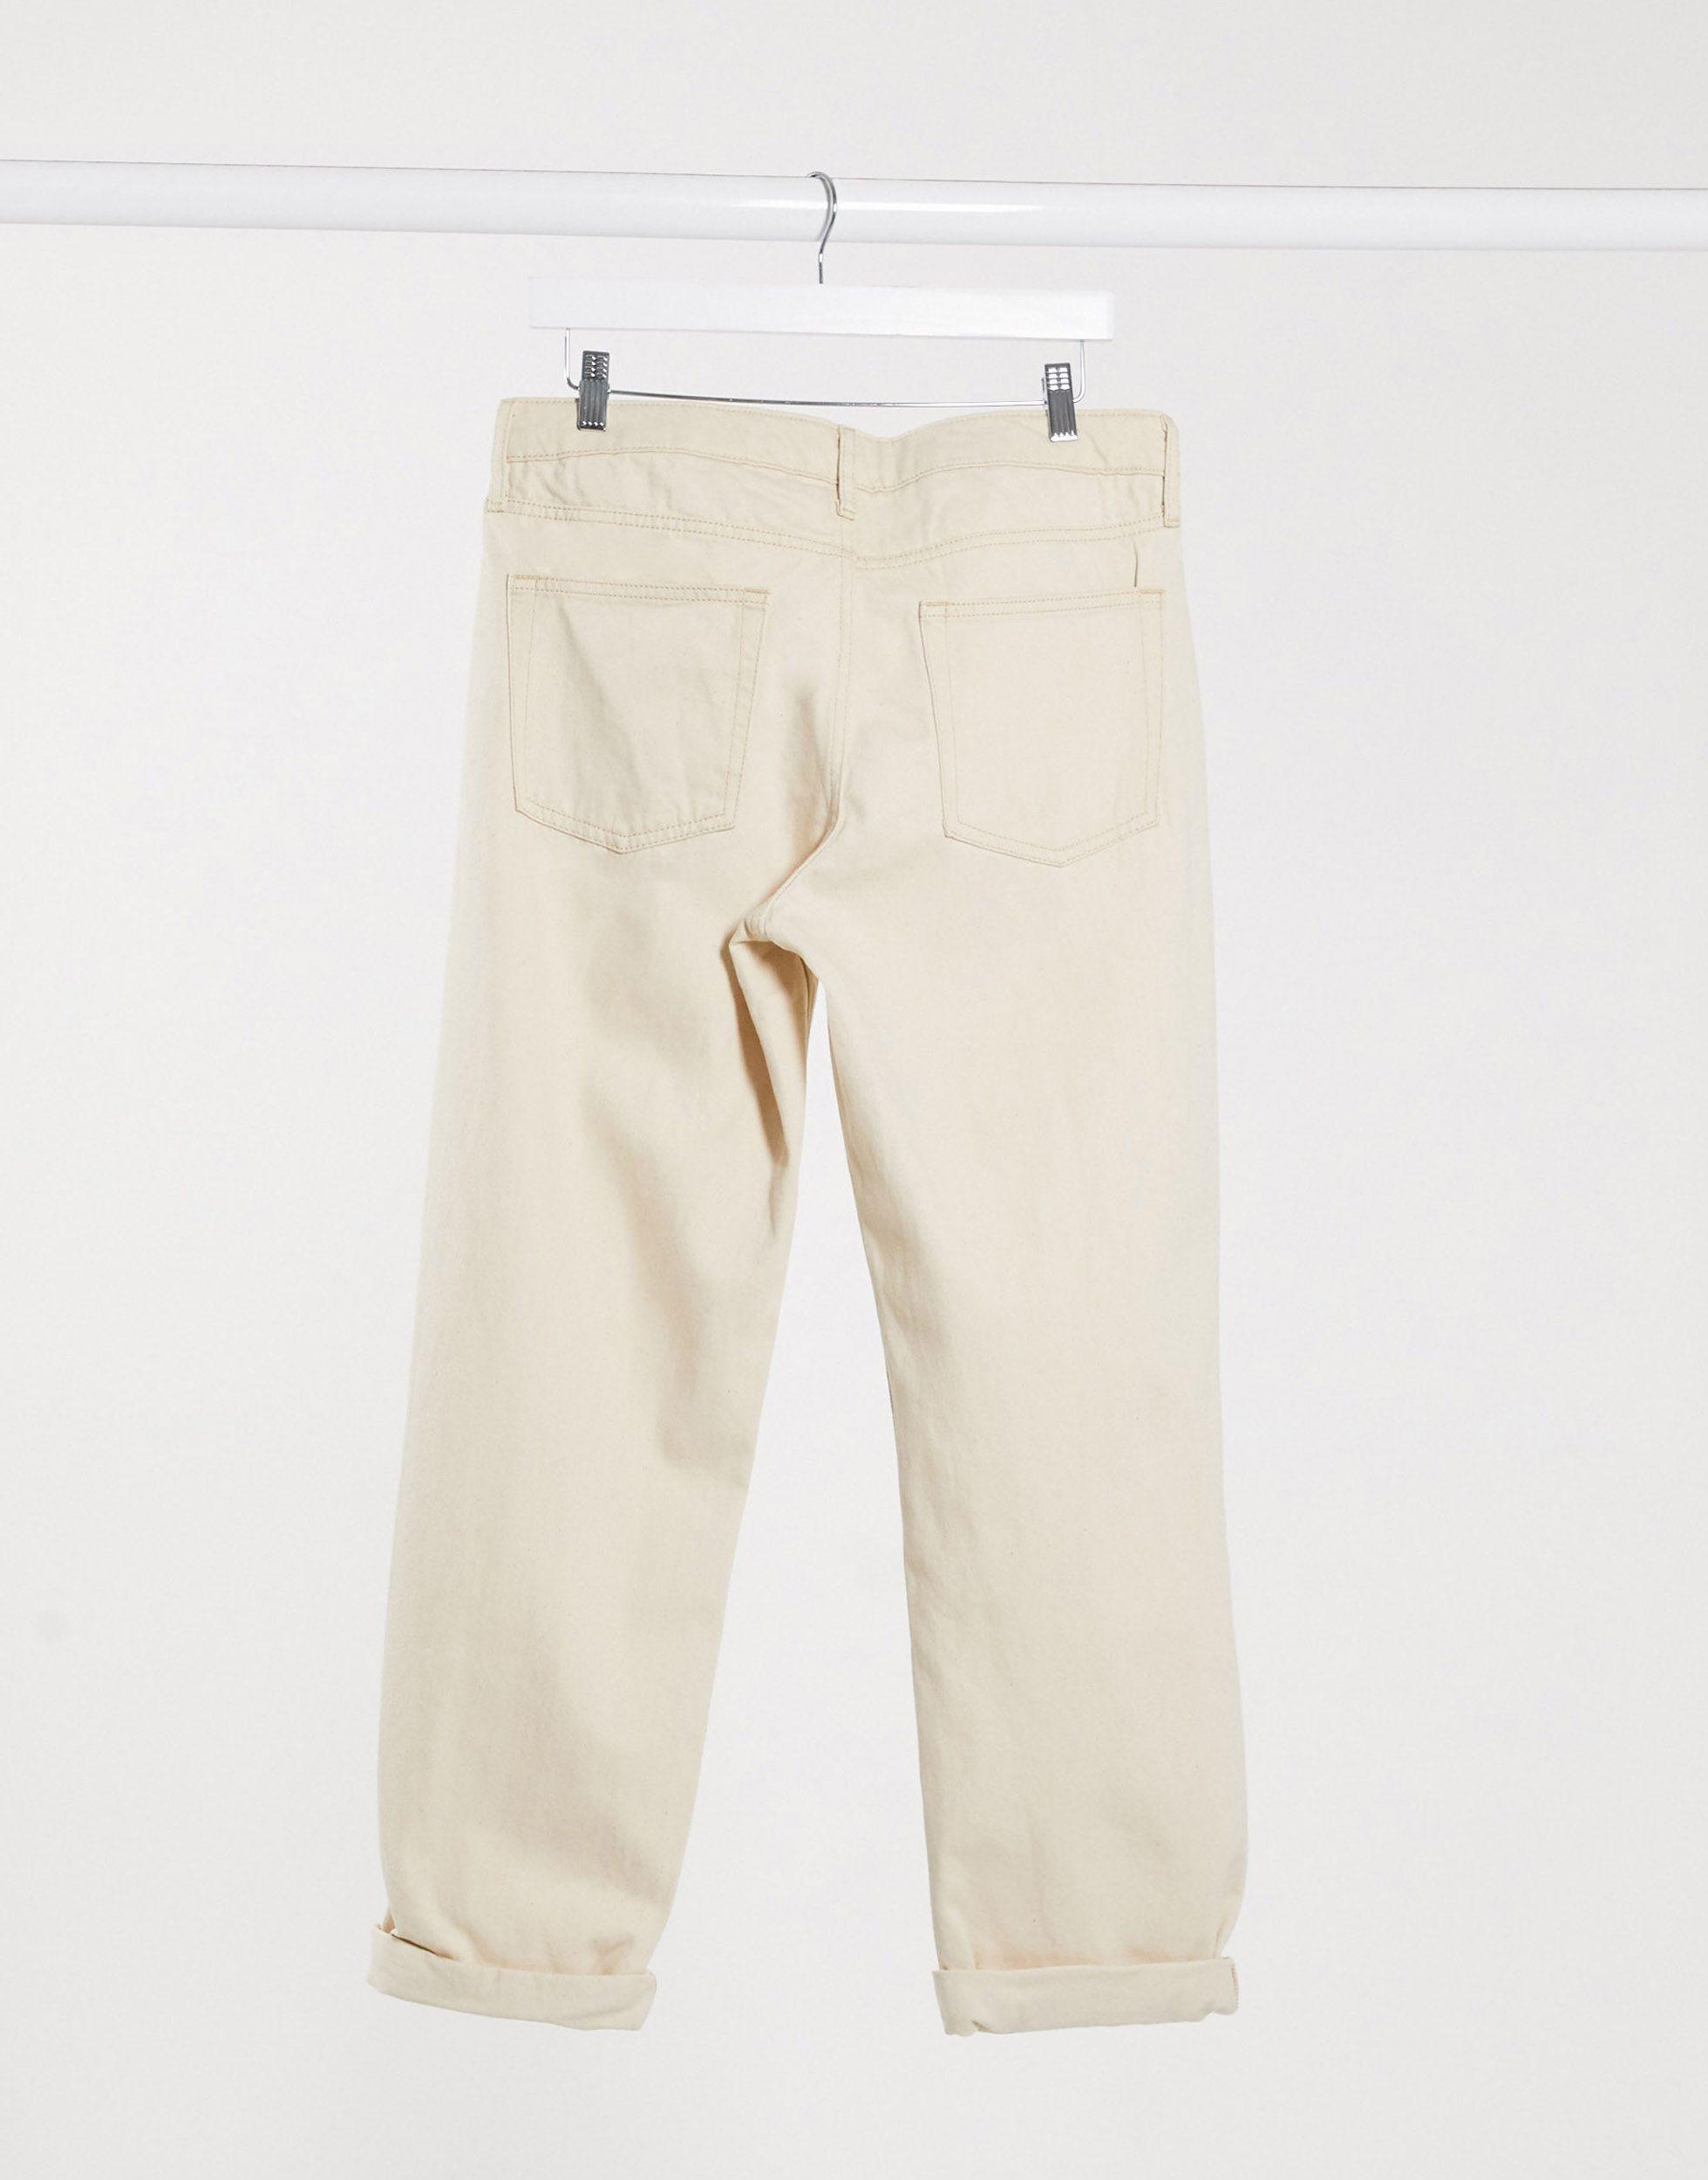 TOPMAN Original Cotton Relaxed Fit Jeans in Natural for Men Lyst